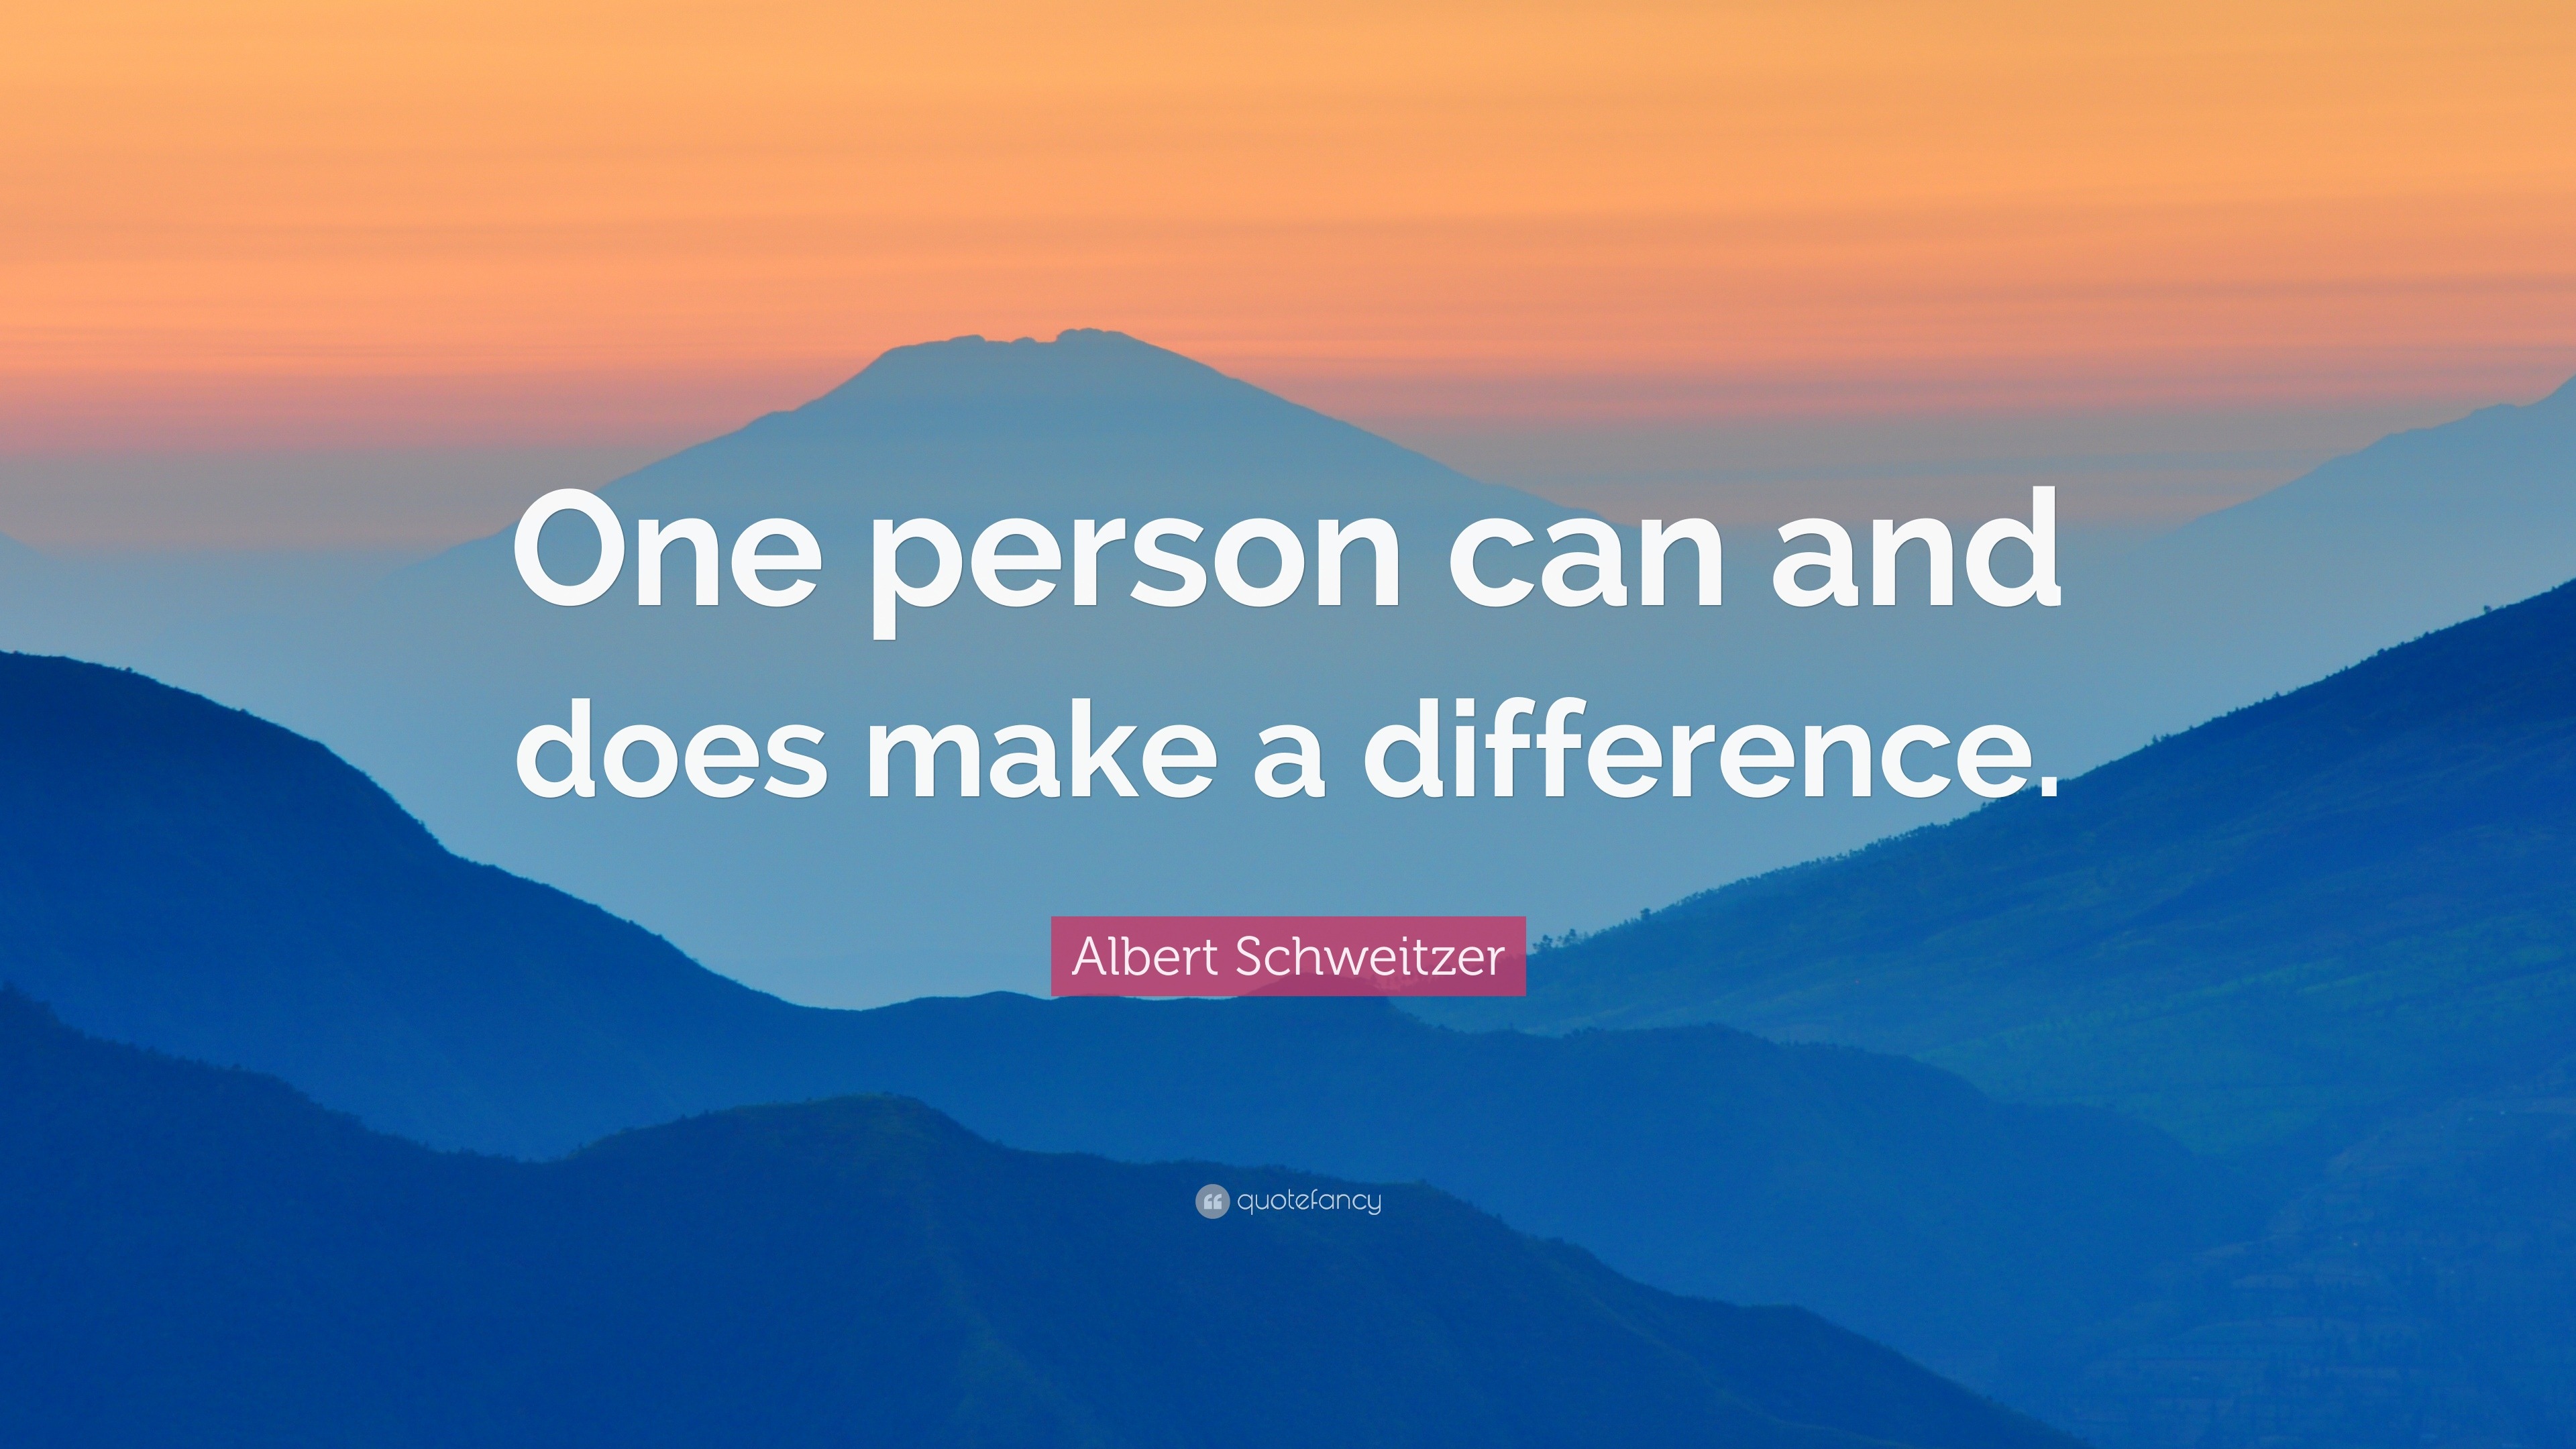 The Power Of One Inspiring Quotes On Making A Difference